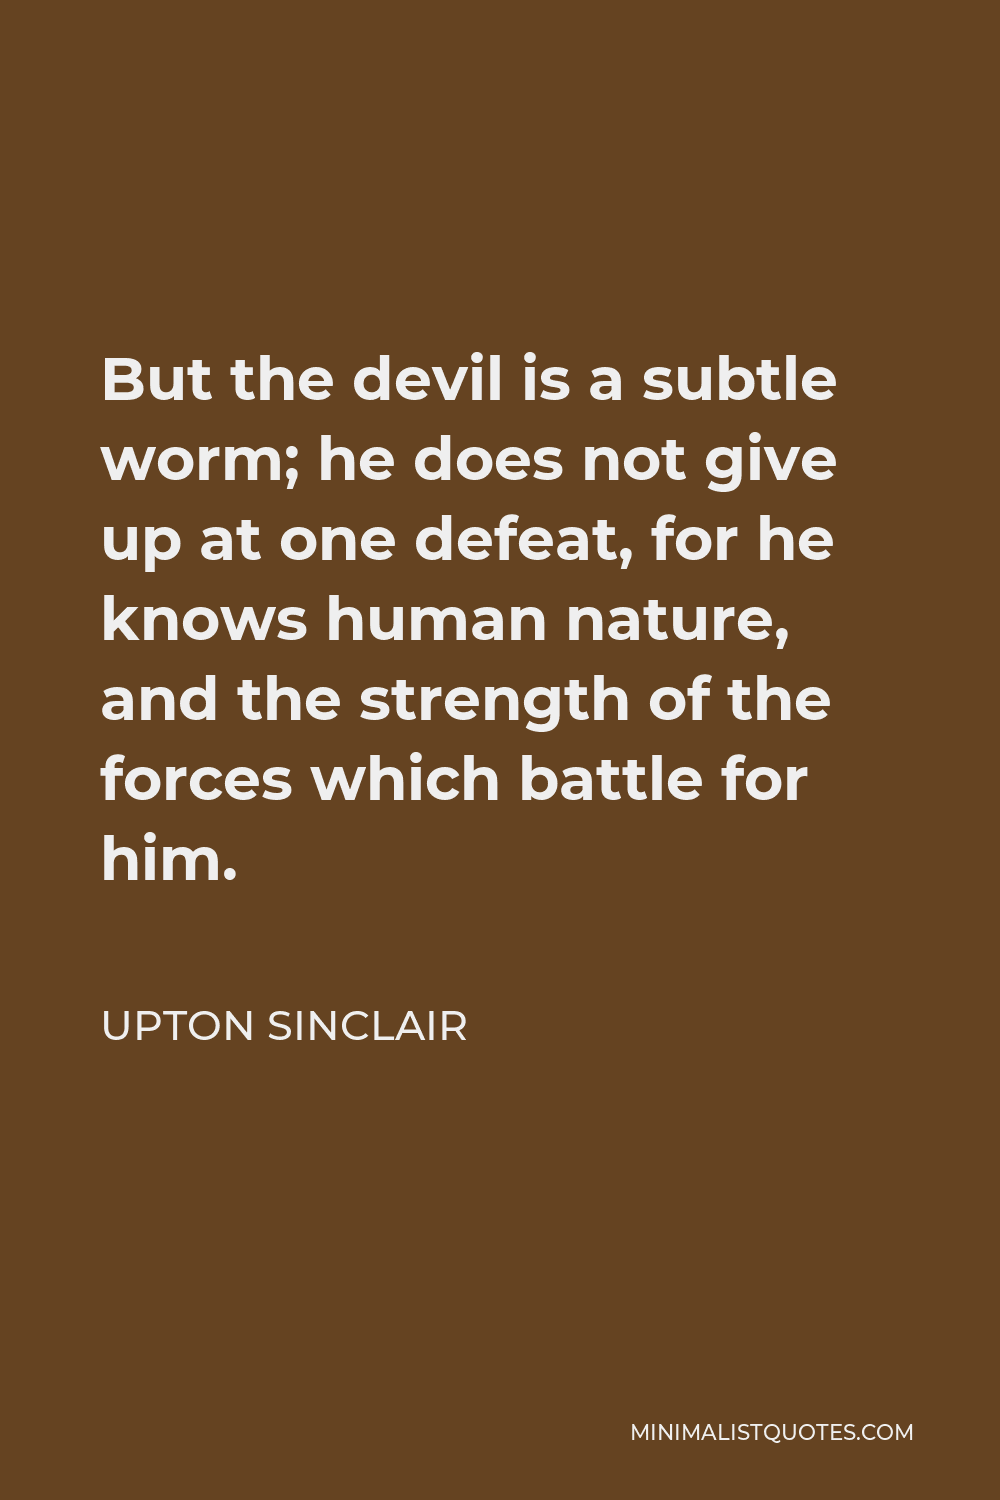 Upton Sinclair Quote - But the devil is a subtle worm; he does not give up at one defeat, for he knows human nature, and the strength of the forces which battle for him.